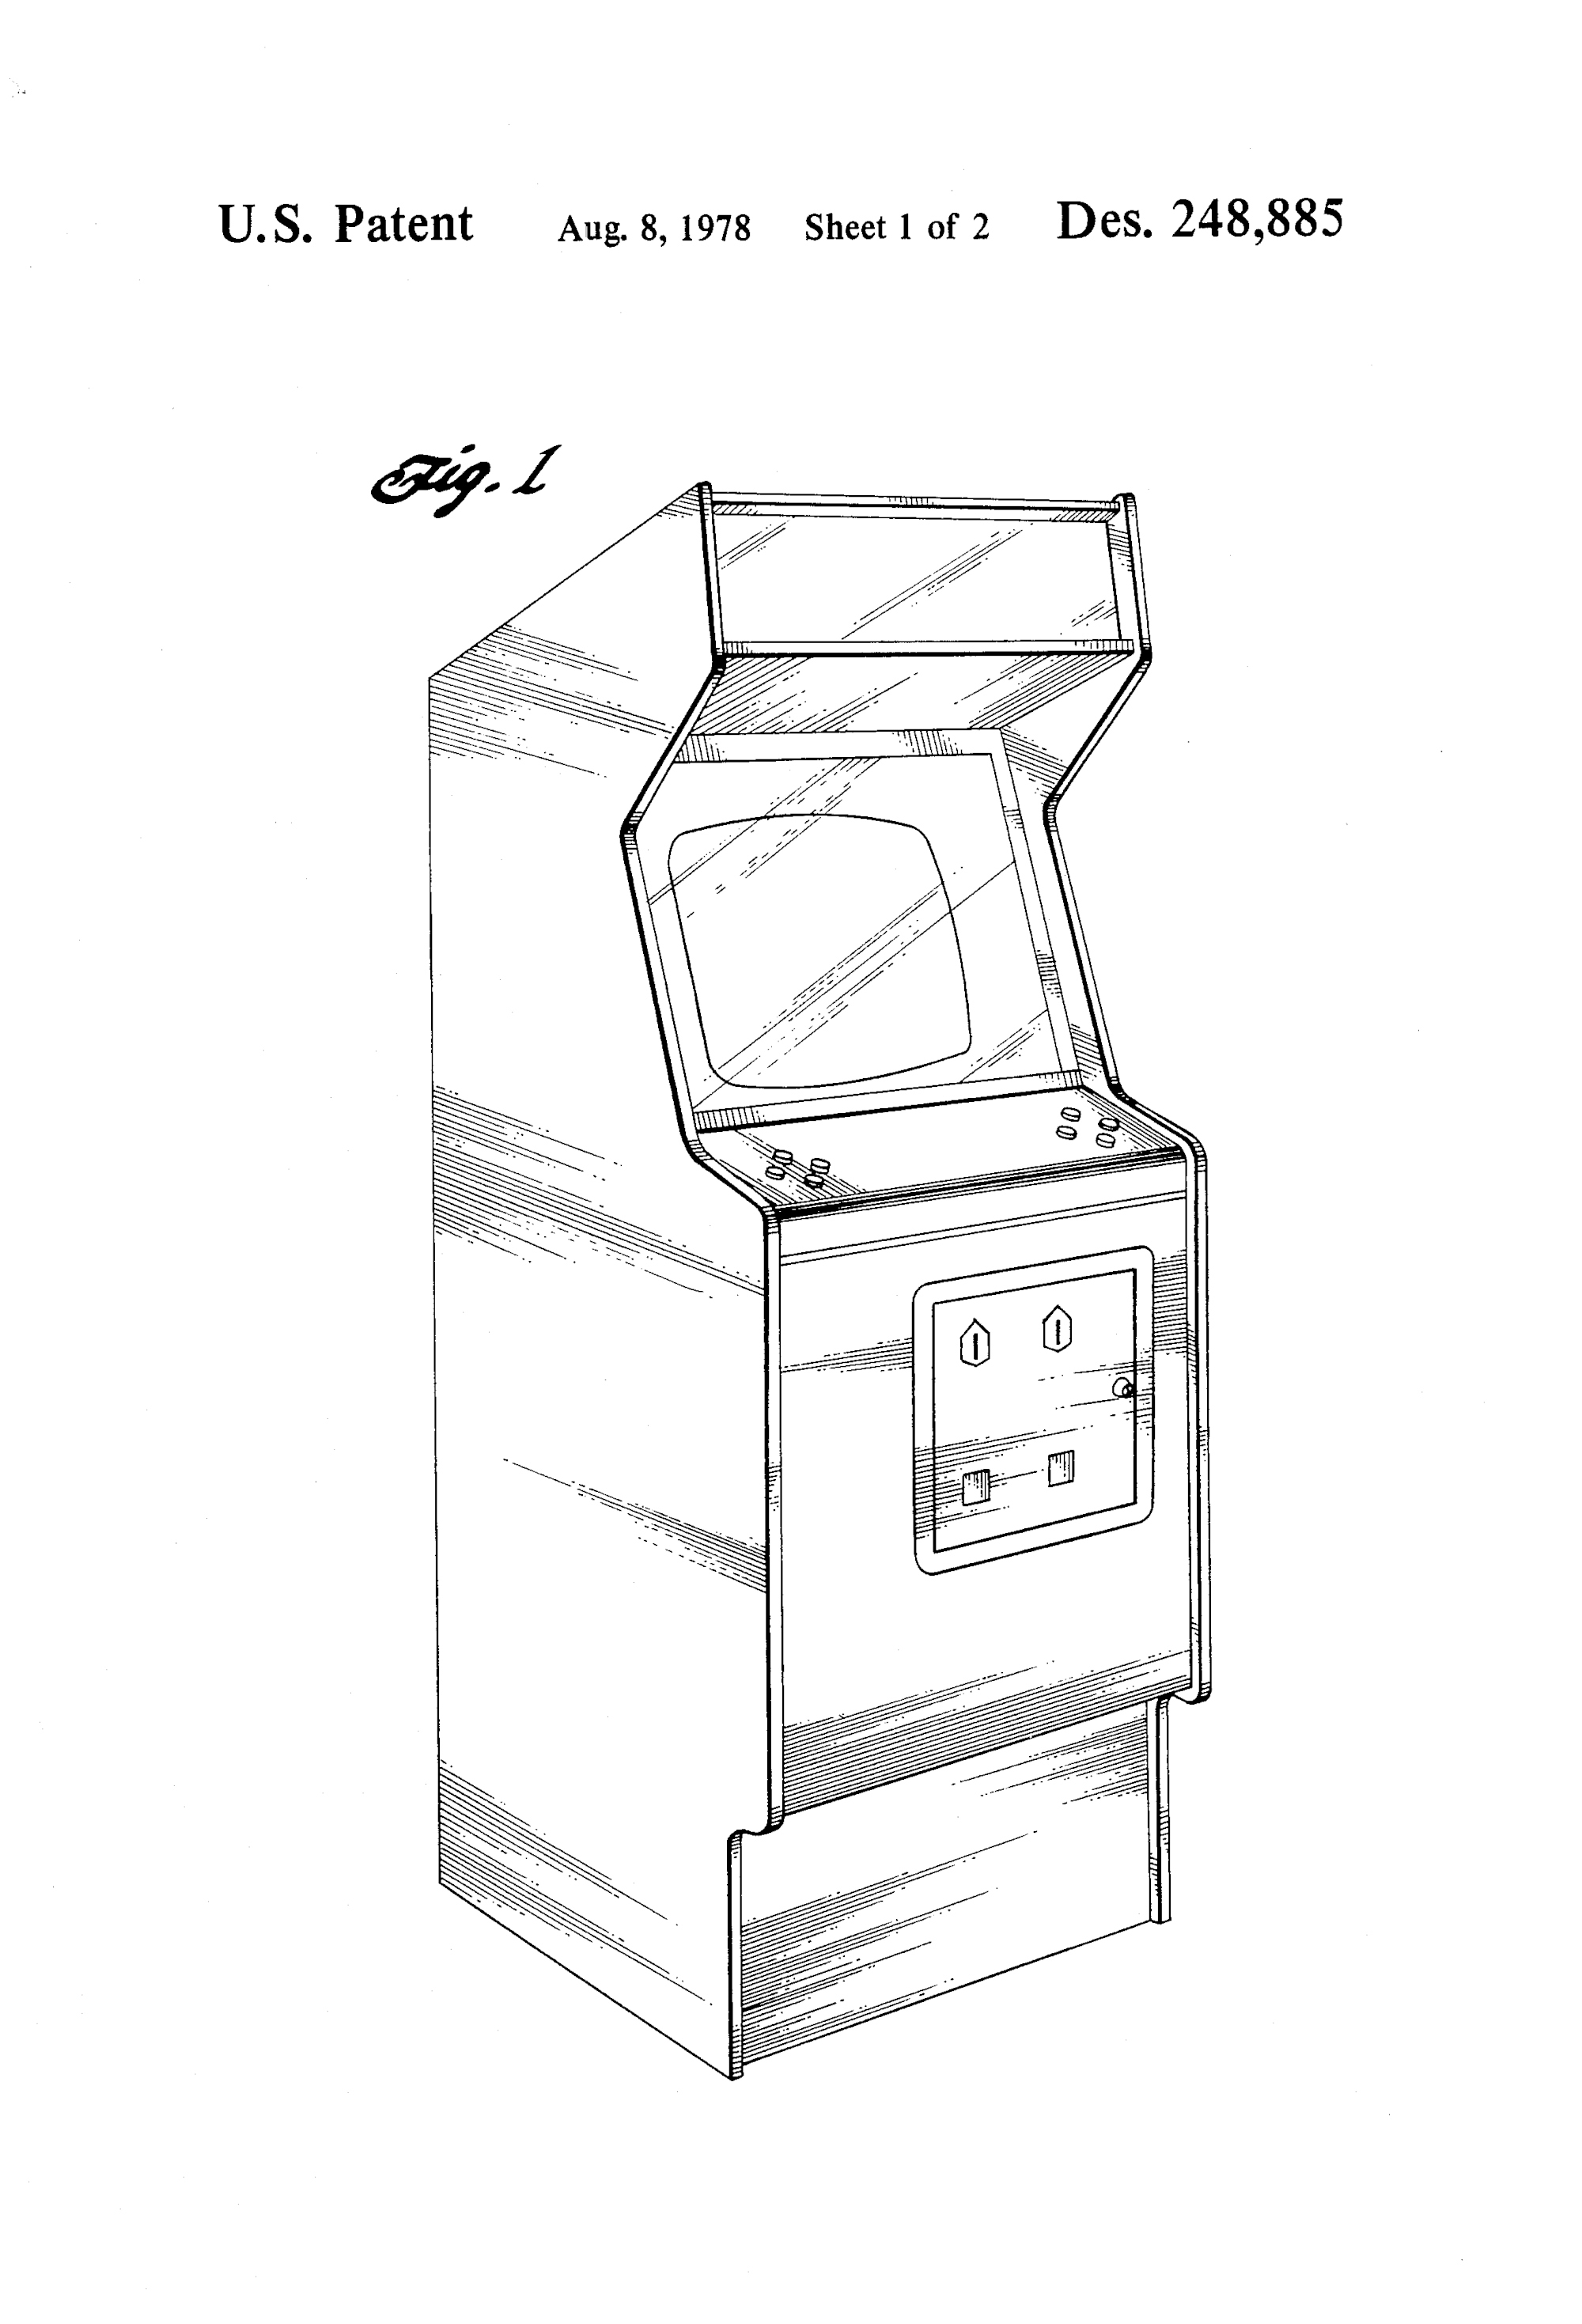 Video Game Cabinet, Lonnie C. Pogue, for Gremlin Industries, 1976/1978. Patent Number: USD 248,885, U.S. Patent Office